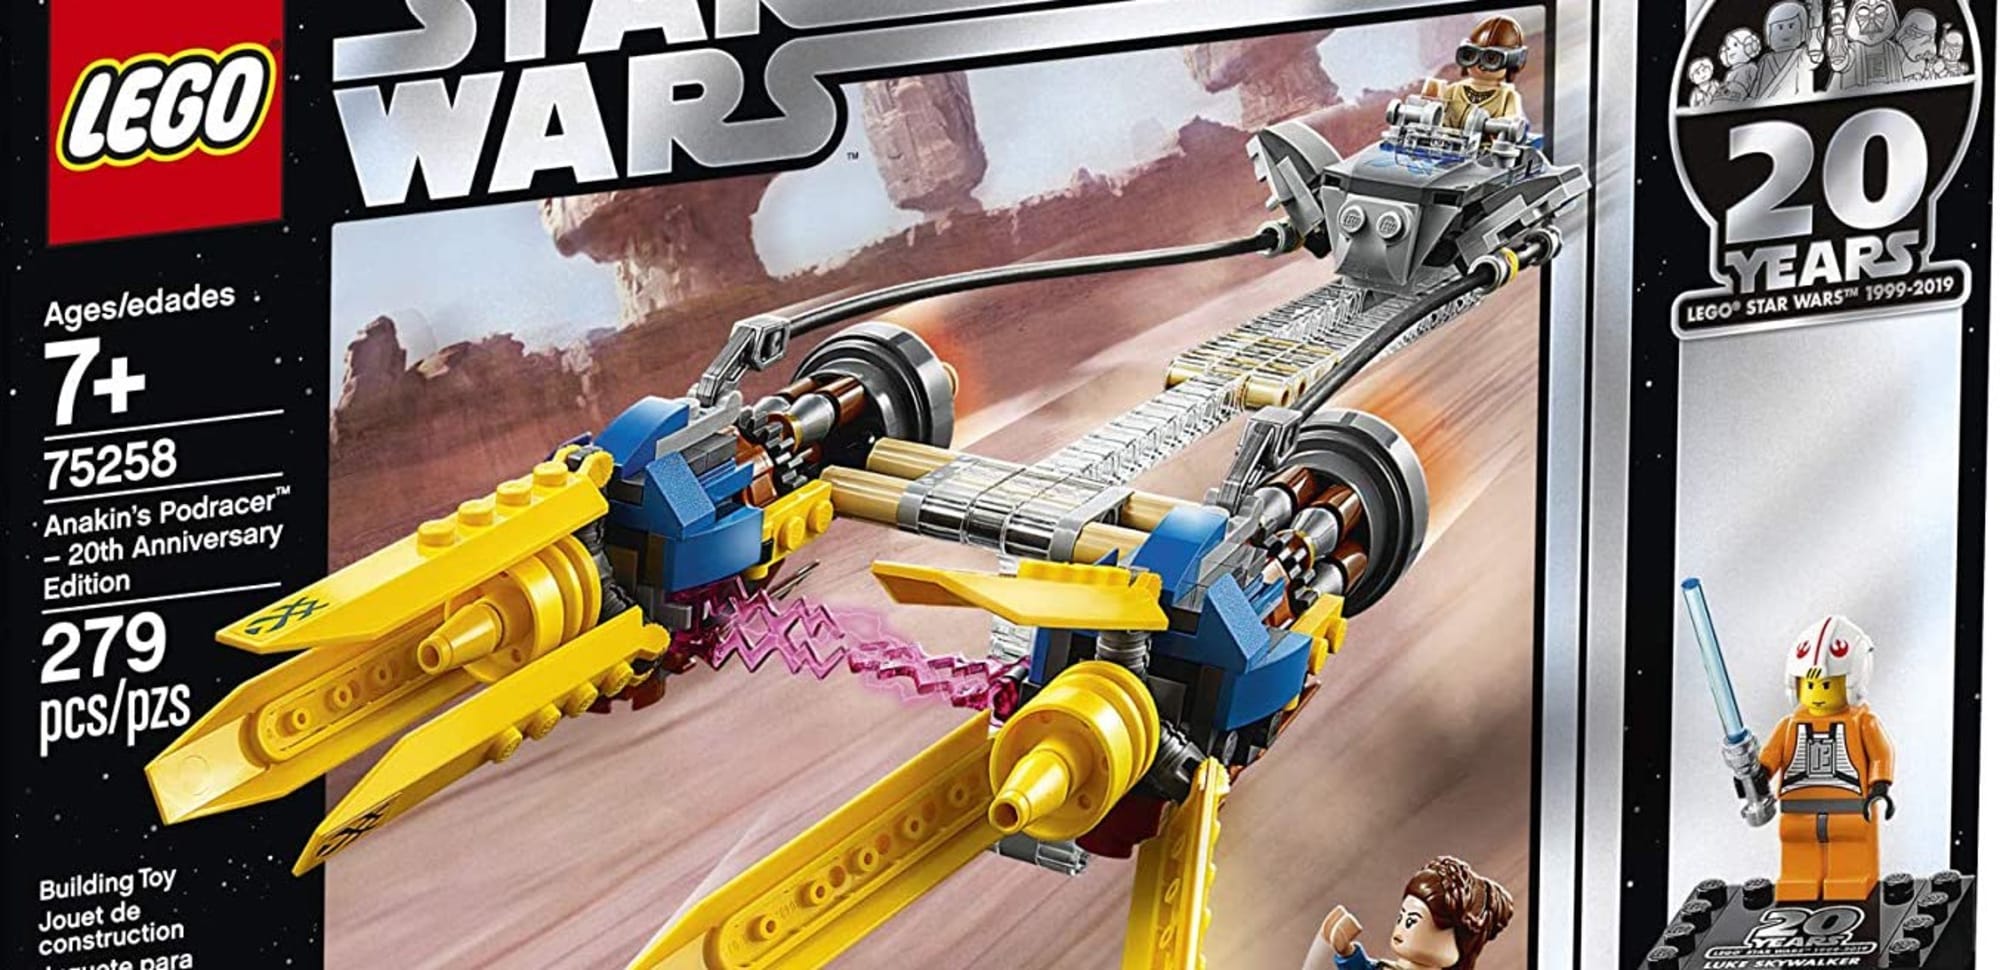 Check the LEGO Wars sets retiring in